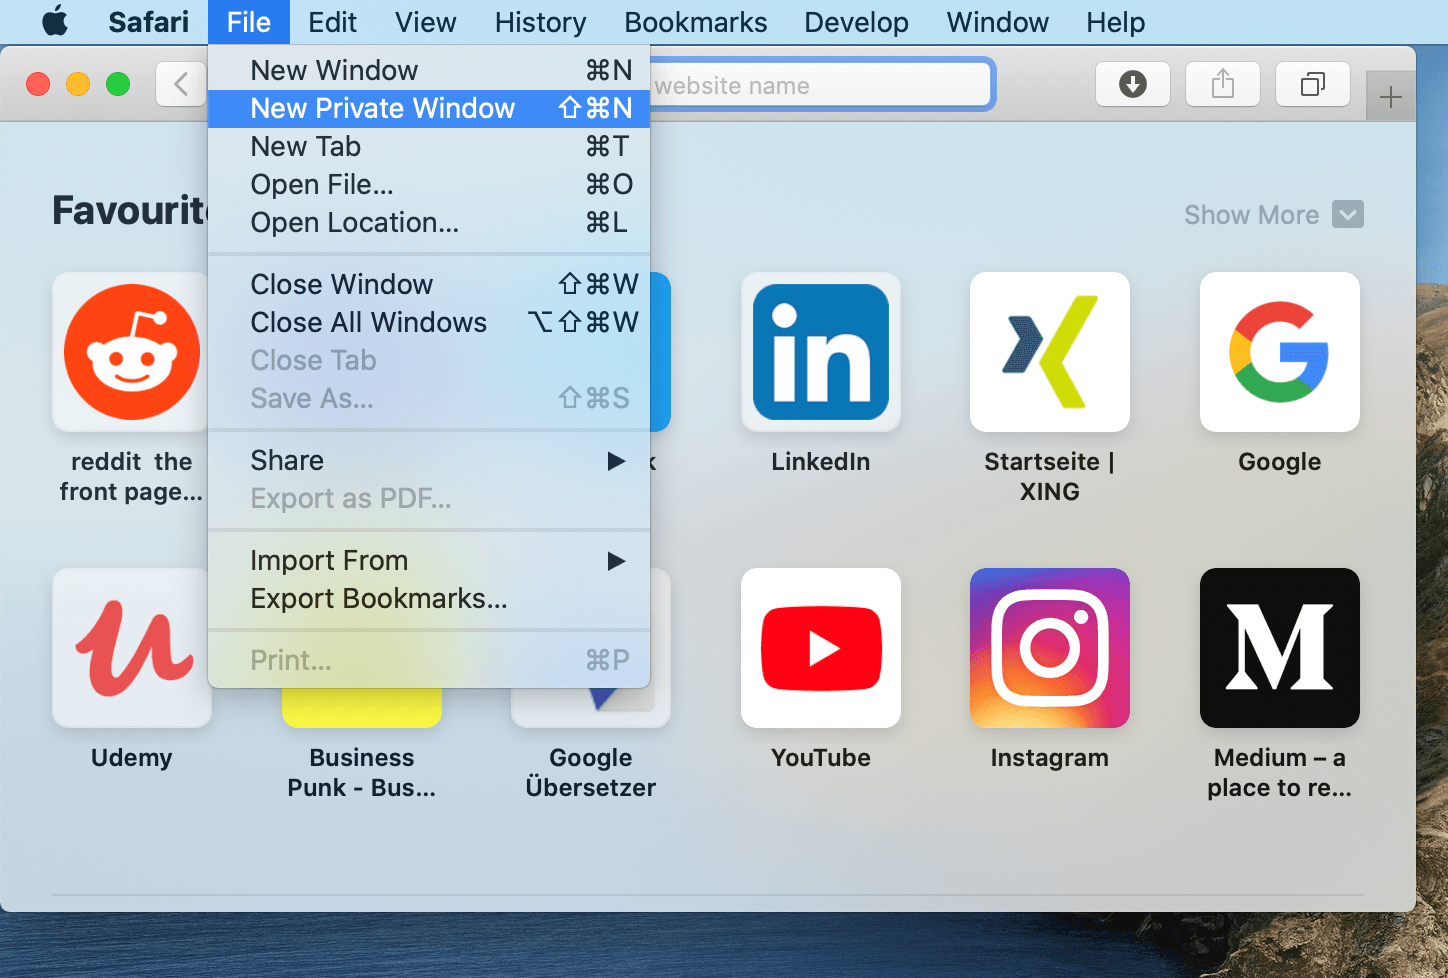 how to open private browsing in safari 12.0.3